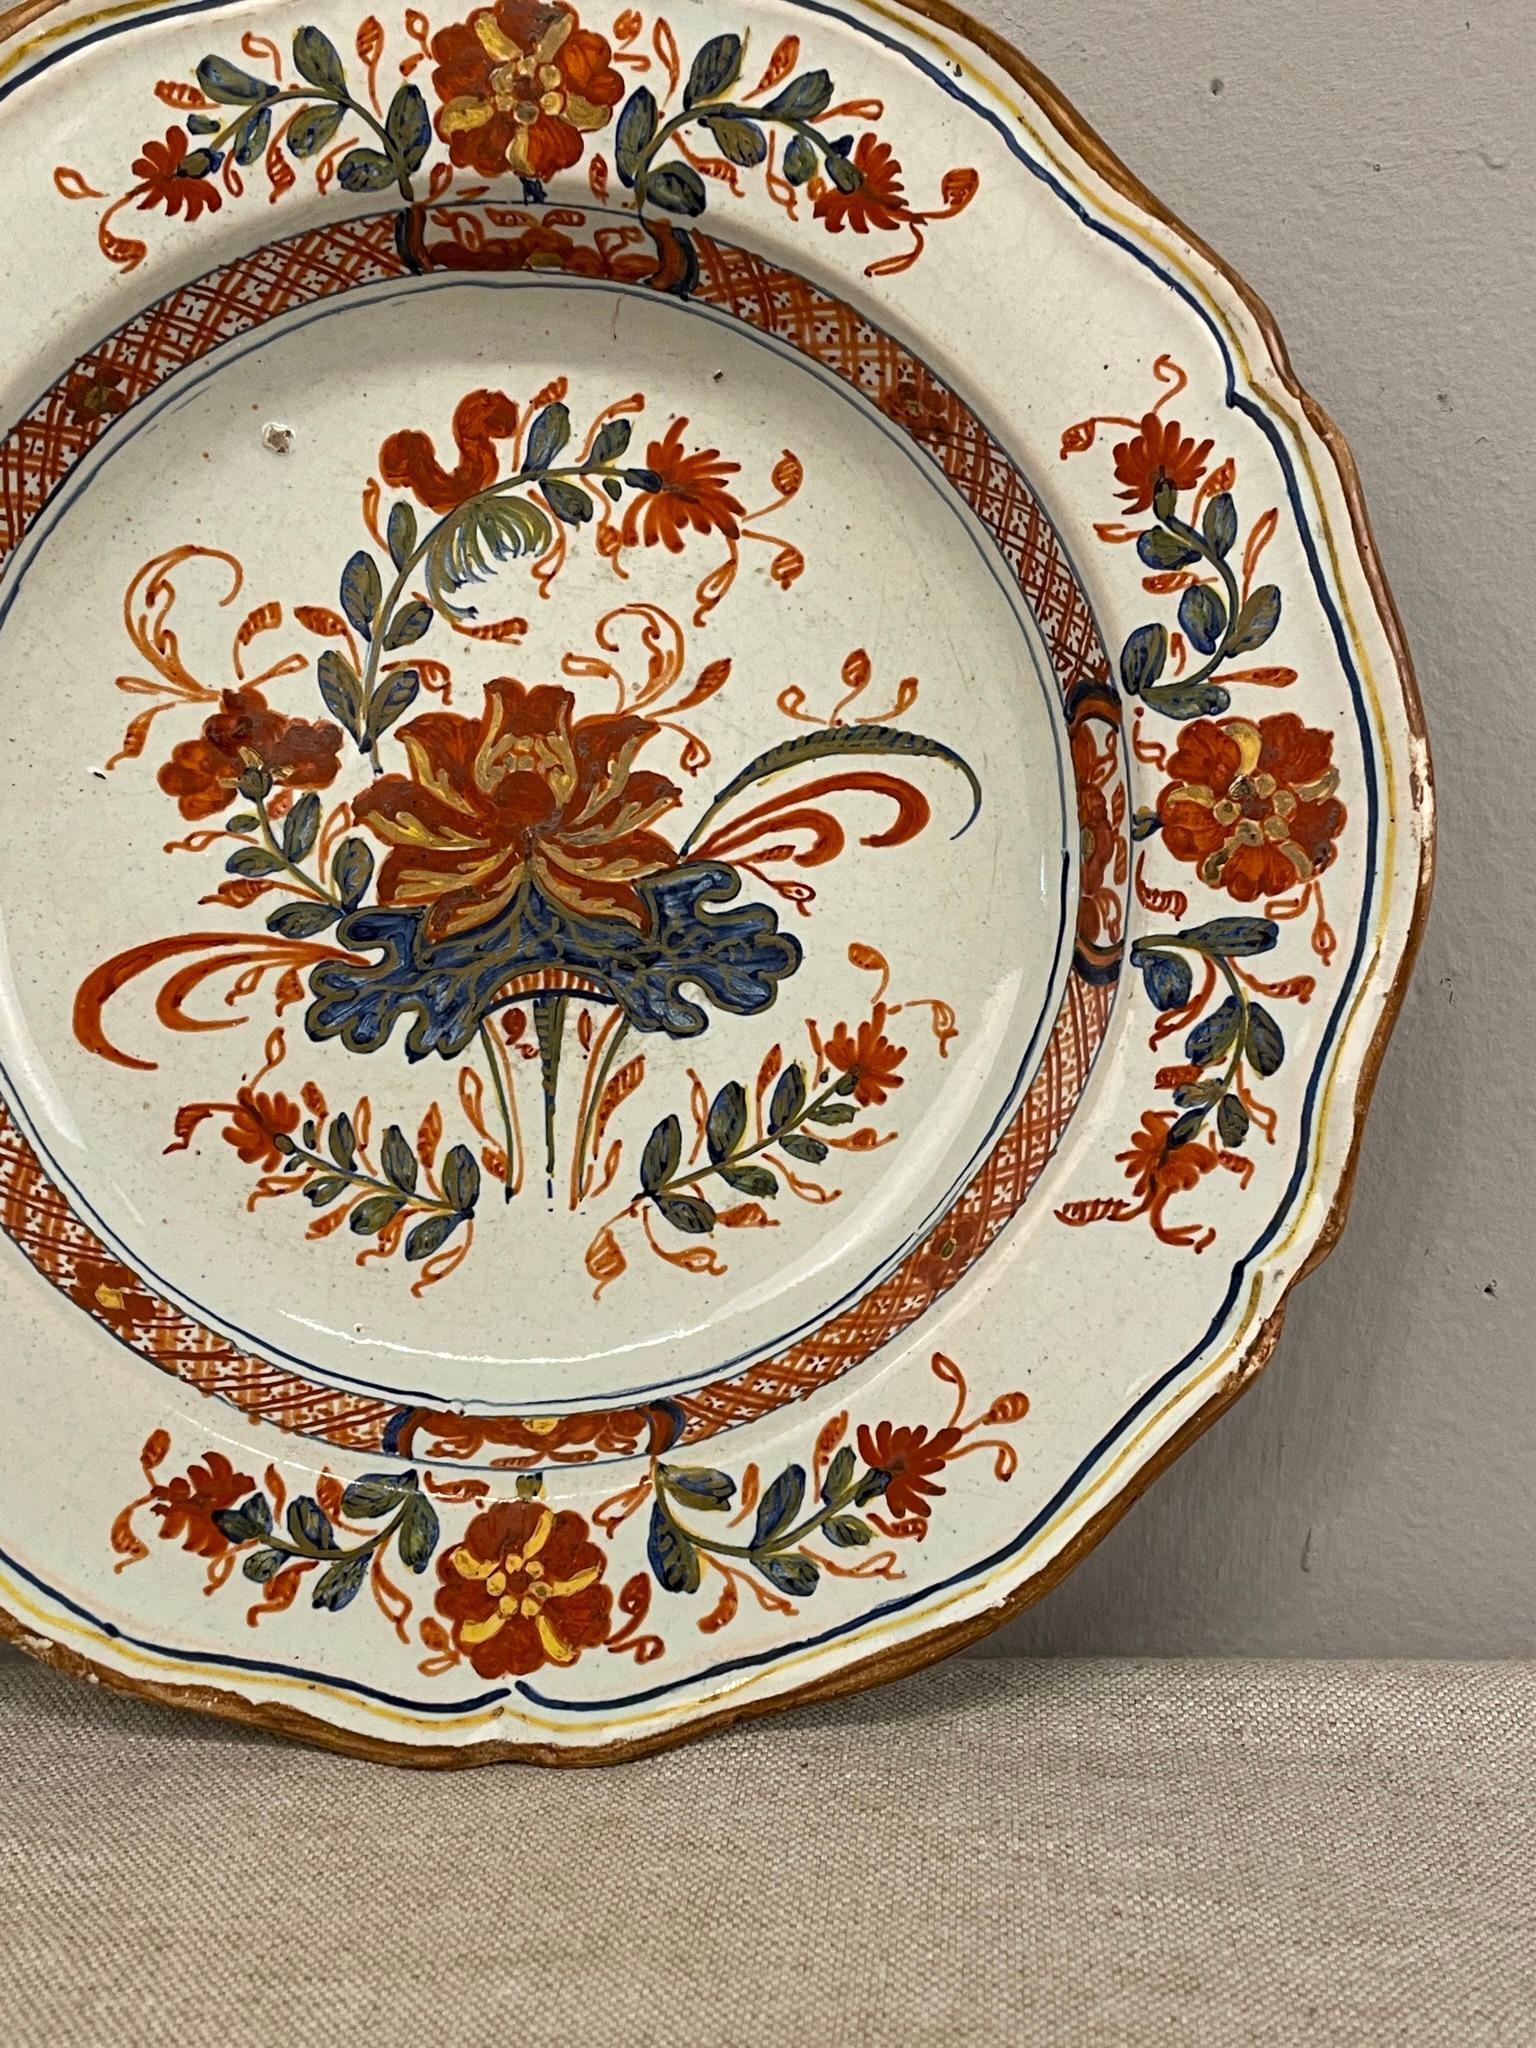 A good 18th Century Faience Polychrome Italian plate, in good condition with no chips no hairline. Dimensions are 9